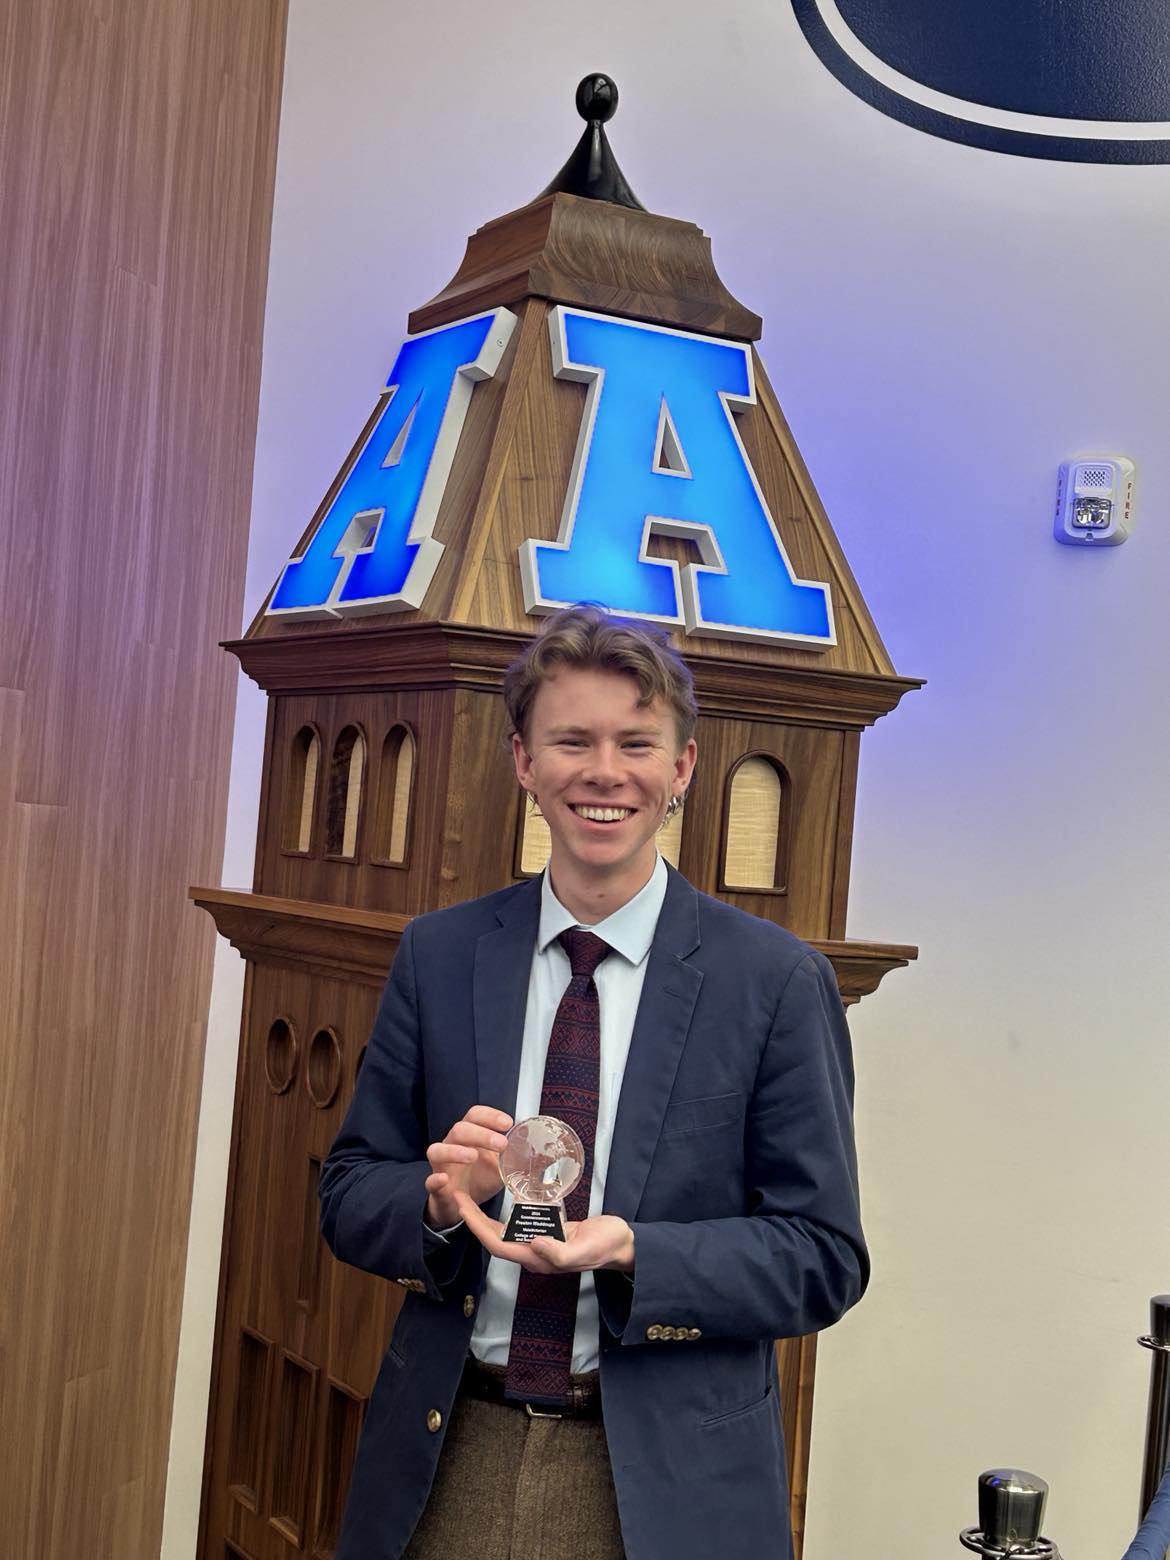 Preston Waddoups standing in front of a small Aggie A wooden stand holding valedictorian award.